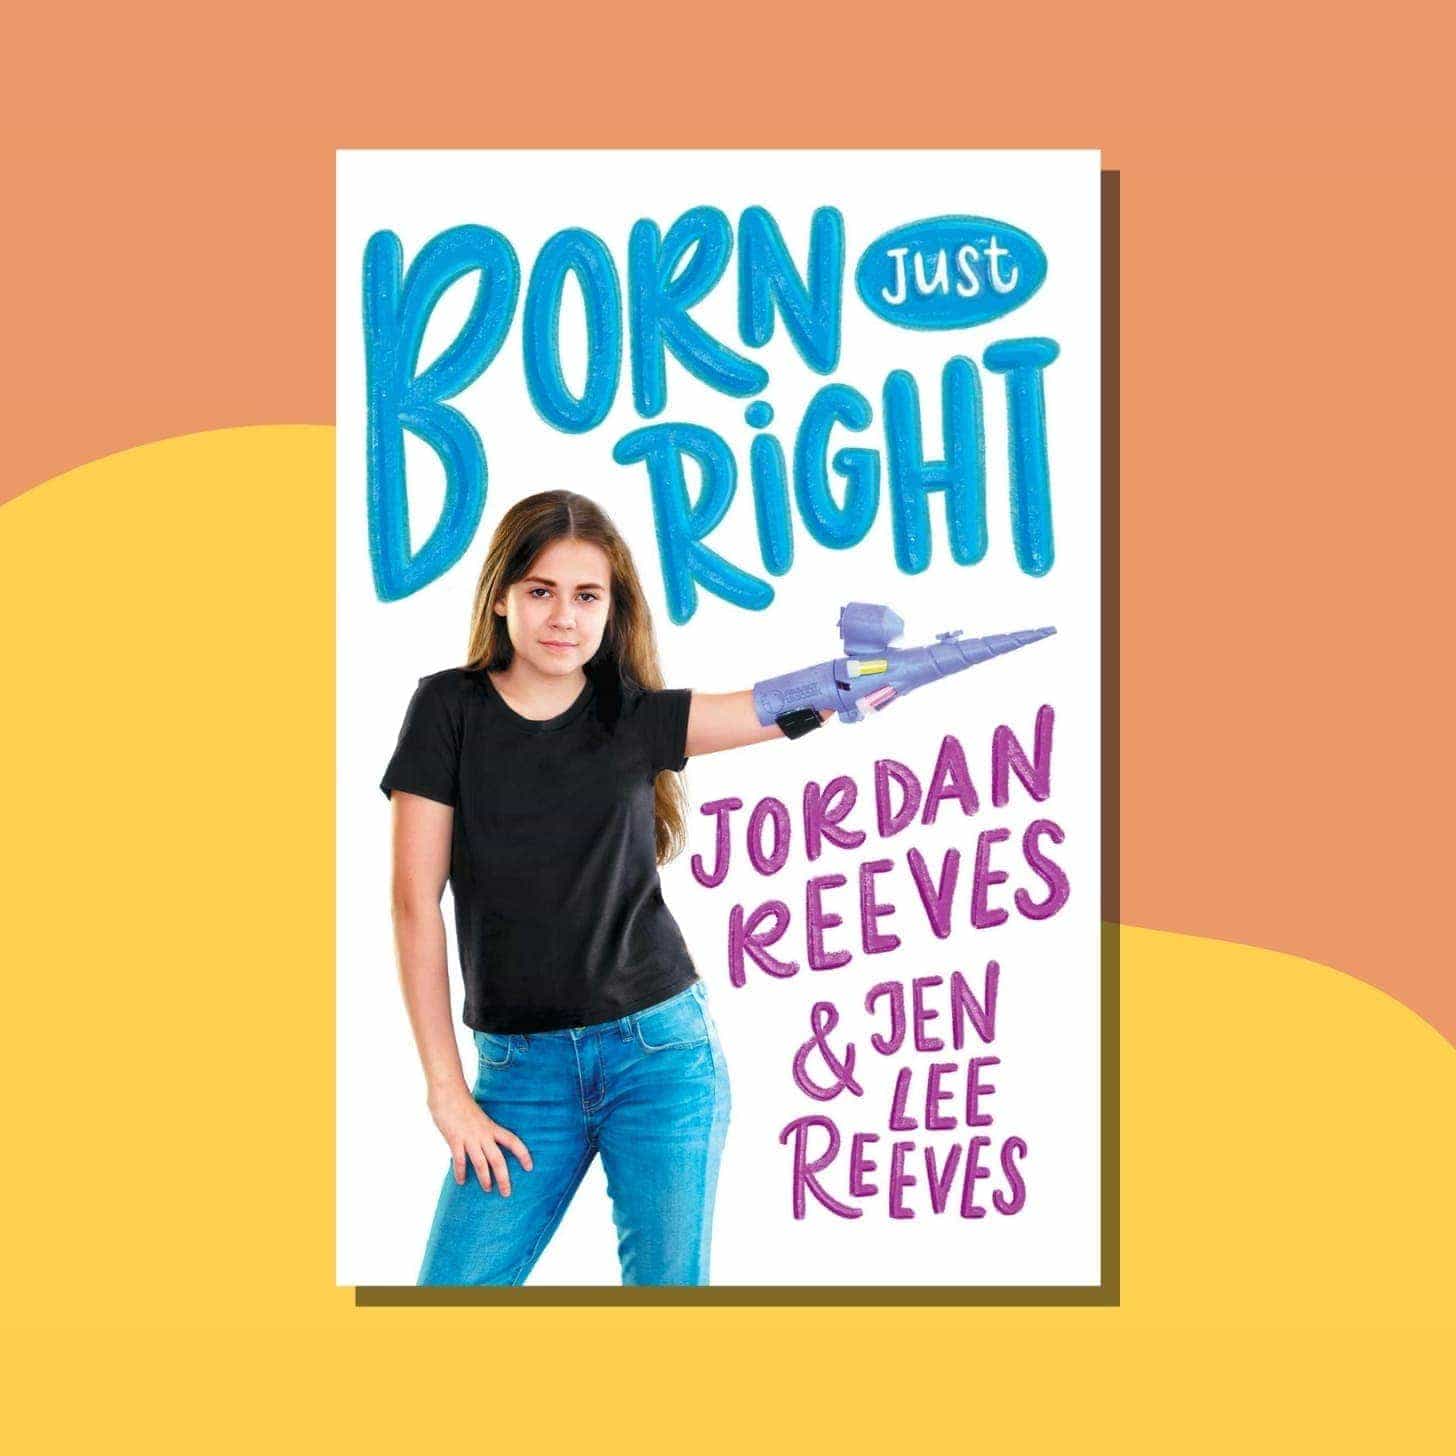 “Born Just Right” by Jordan Reeves - cover shows Jordan with a playful purple prosthetic on her arm